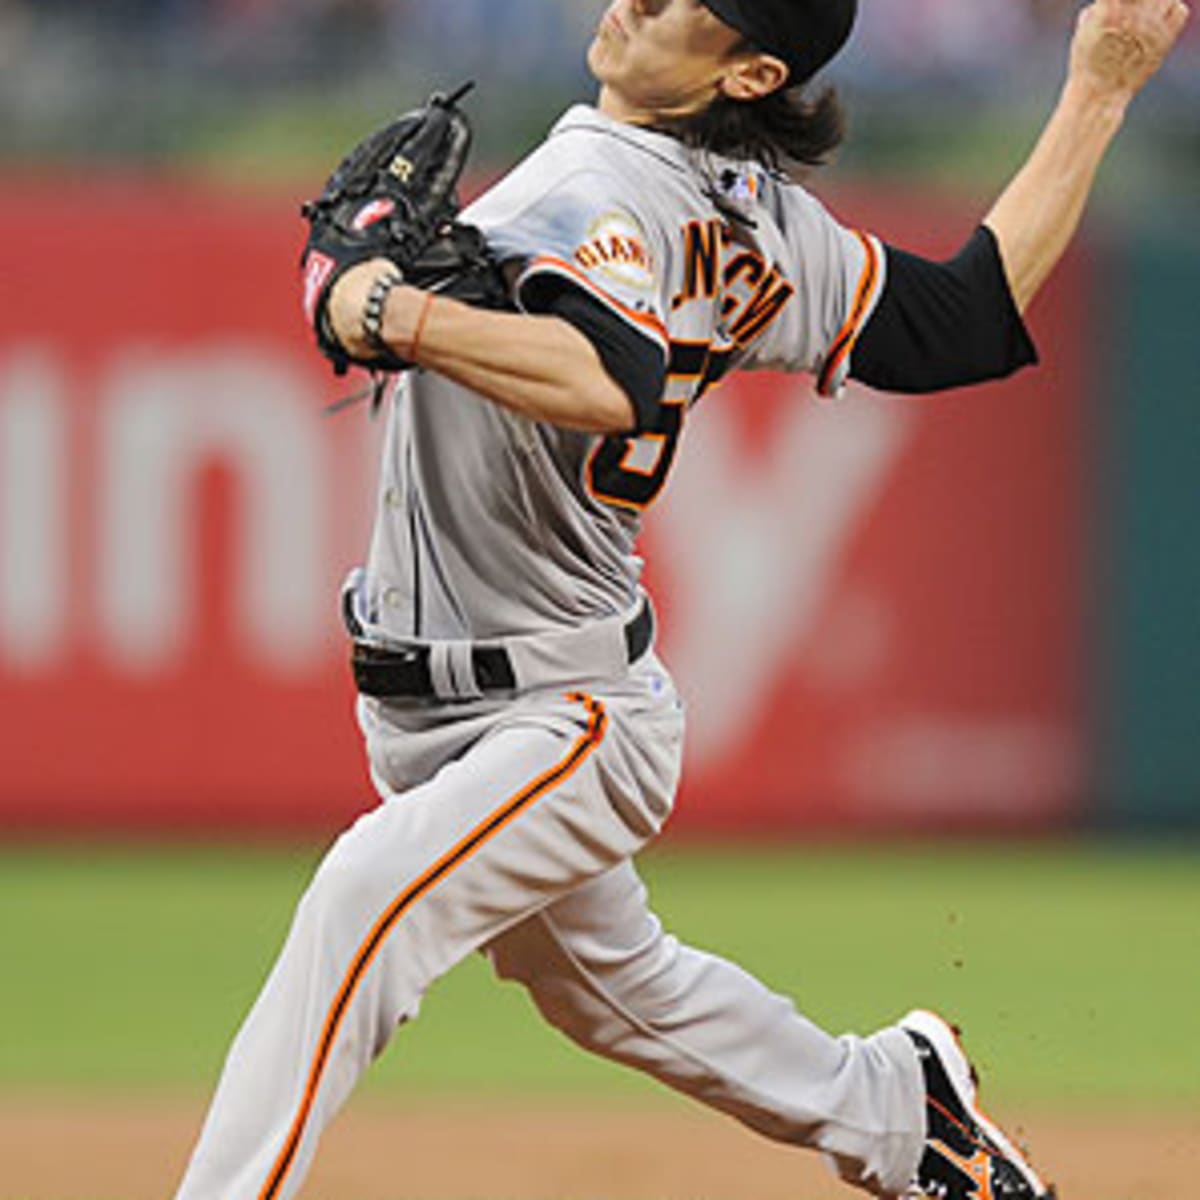 Giants' Lincecum throws second no-hitter